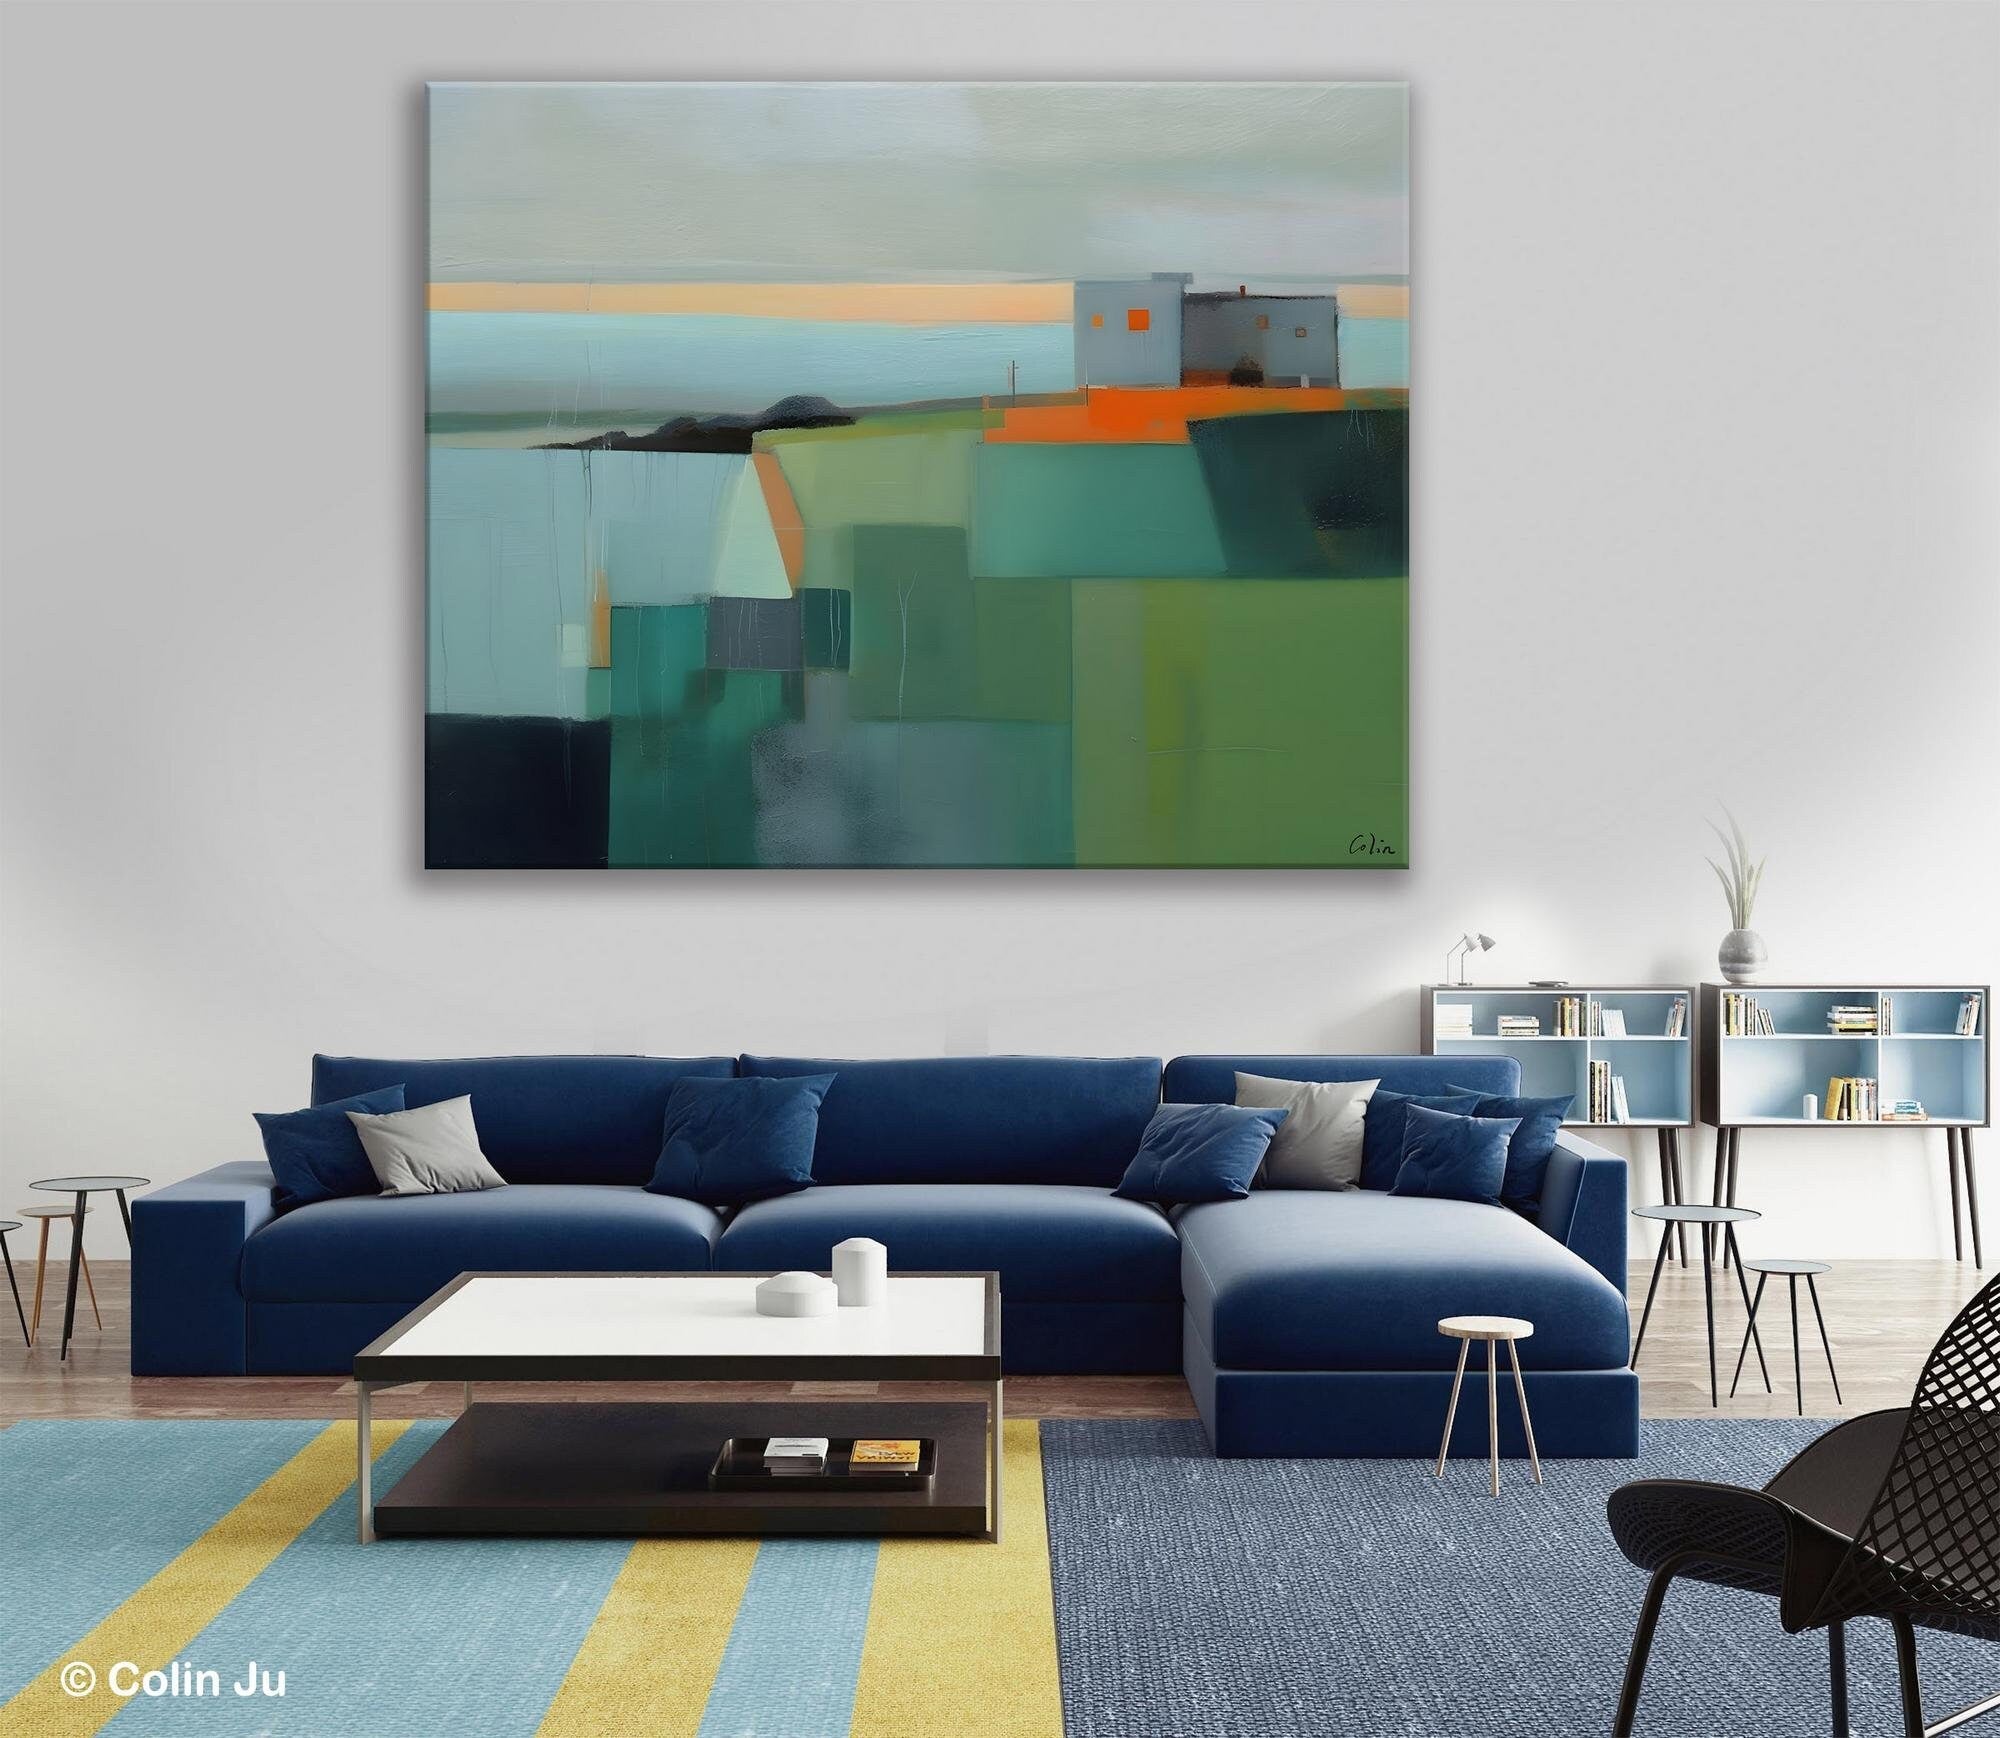 Large Original Canvas Wall Art, Contemporary Landscape Paintings, Extra Large Acrylic Painting for Dining Room, Abstract Painting on Canvas-Paintingforhome